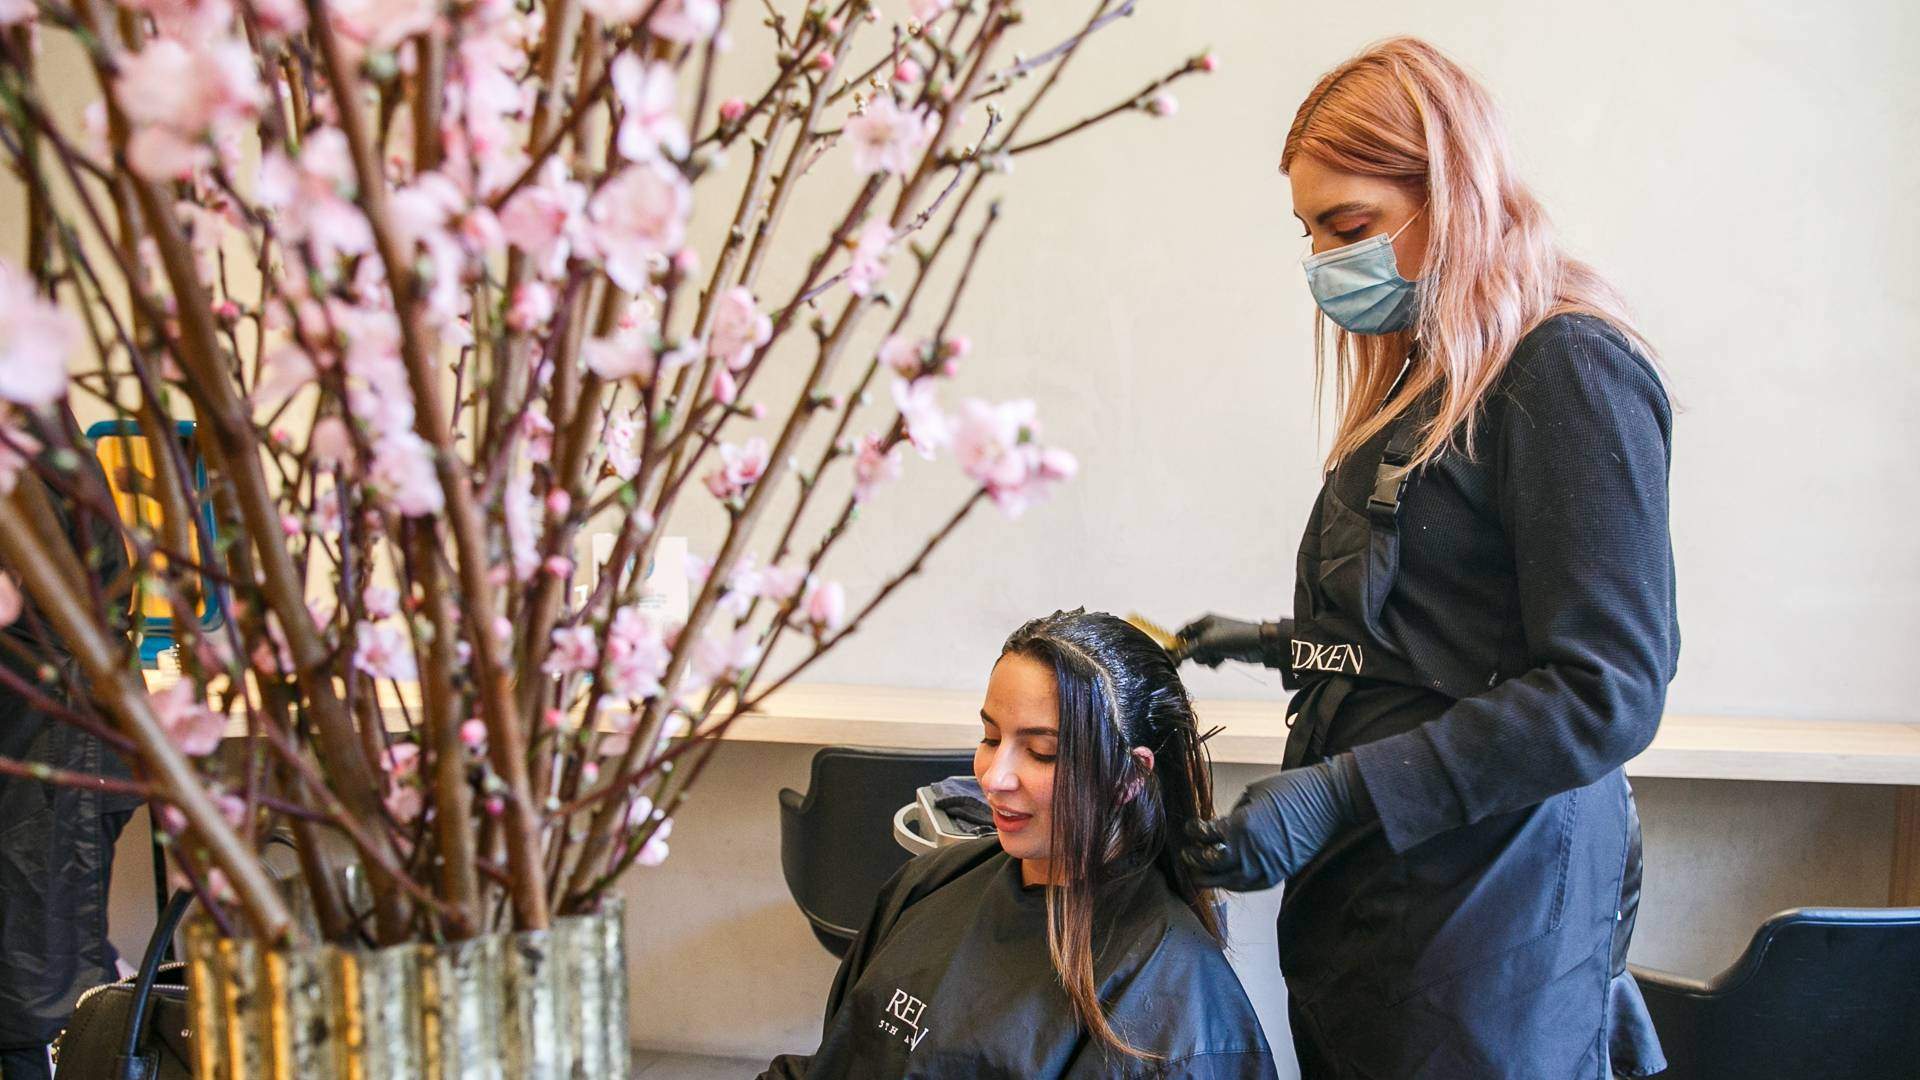 Hairdresser and customer during an appointment